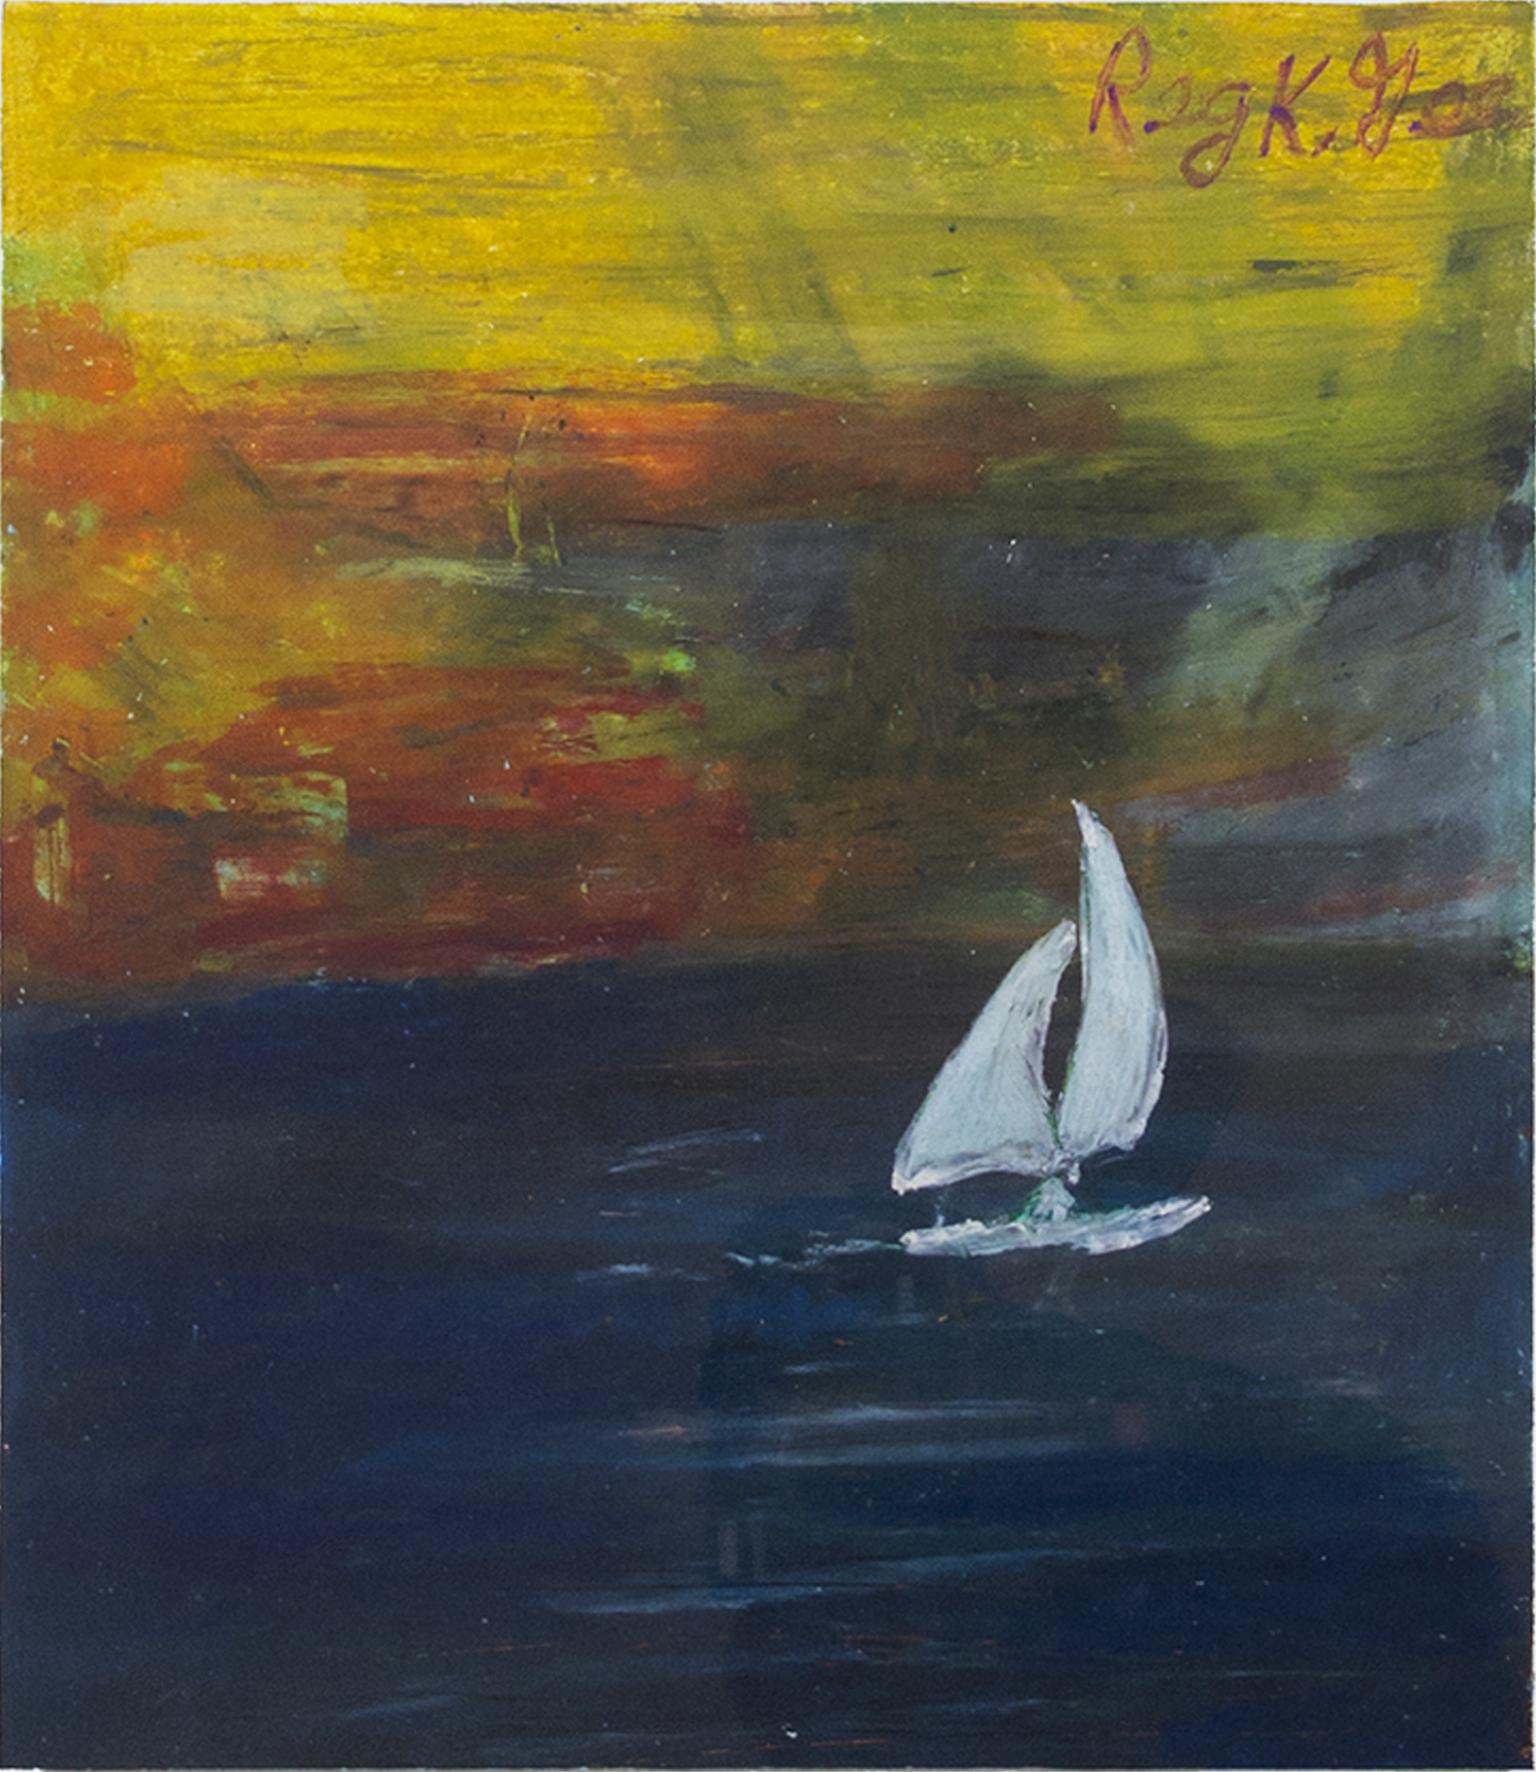 "Coasting Sailboat" is an original pastel drawing by Reginald K. Gee. The artist signed the piece lower right. It depicts a white sailboat on a dark sea with a colorful background. 

12" x 9" art
20 1/2" x 18 5/8" frame

Reginald K. Gee was born in